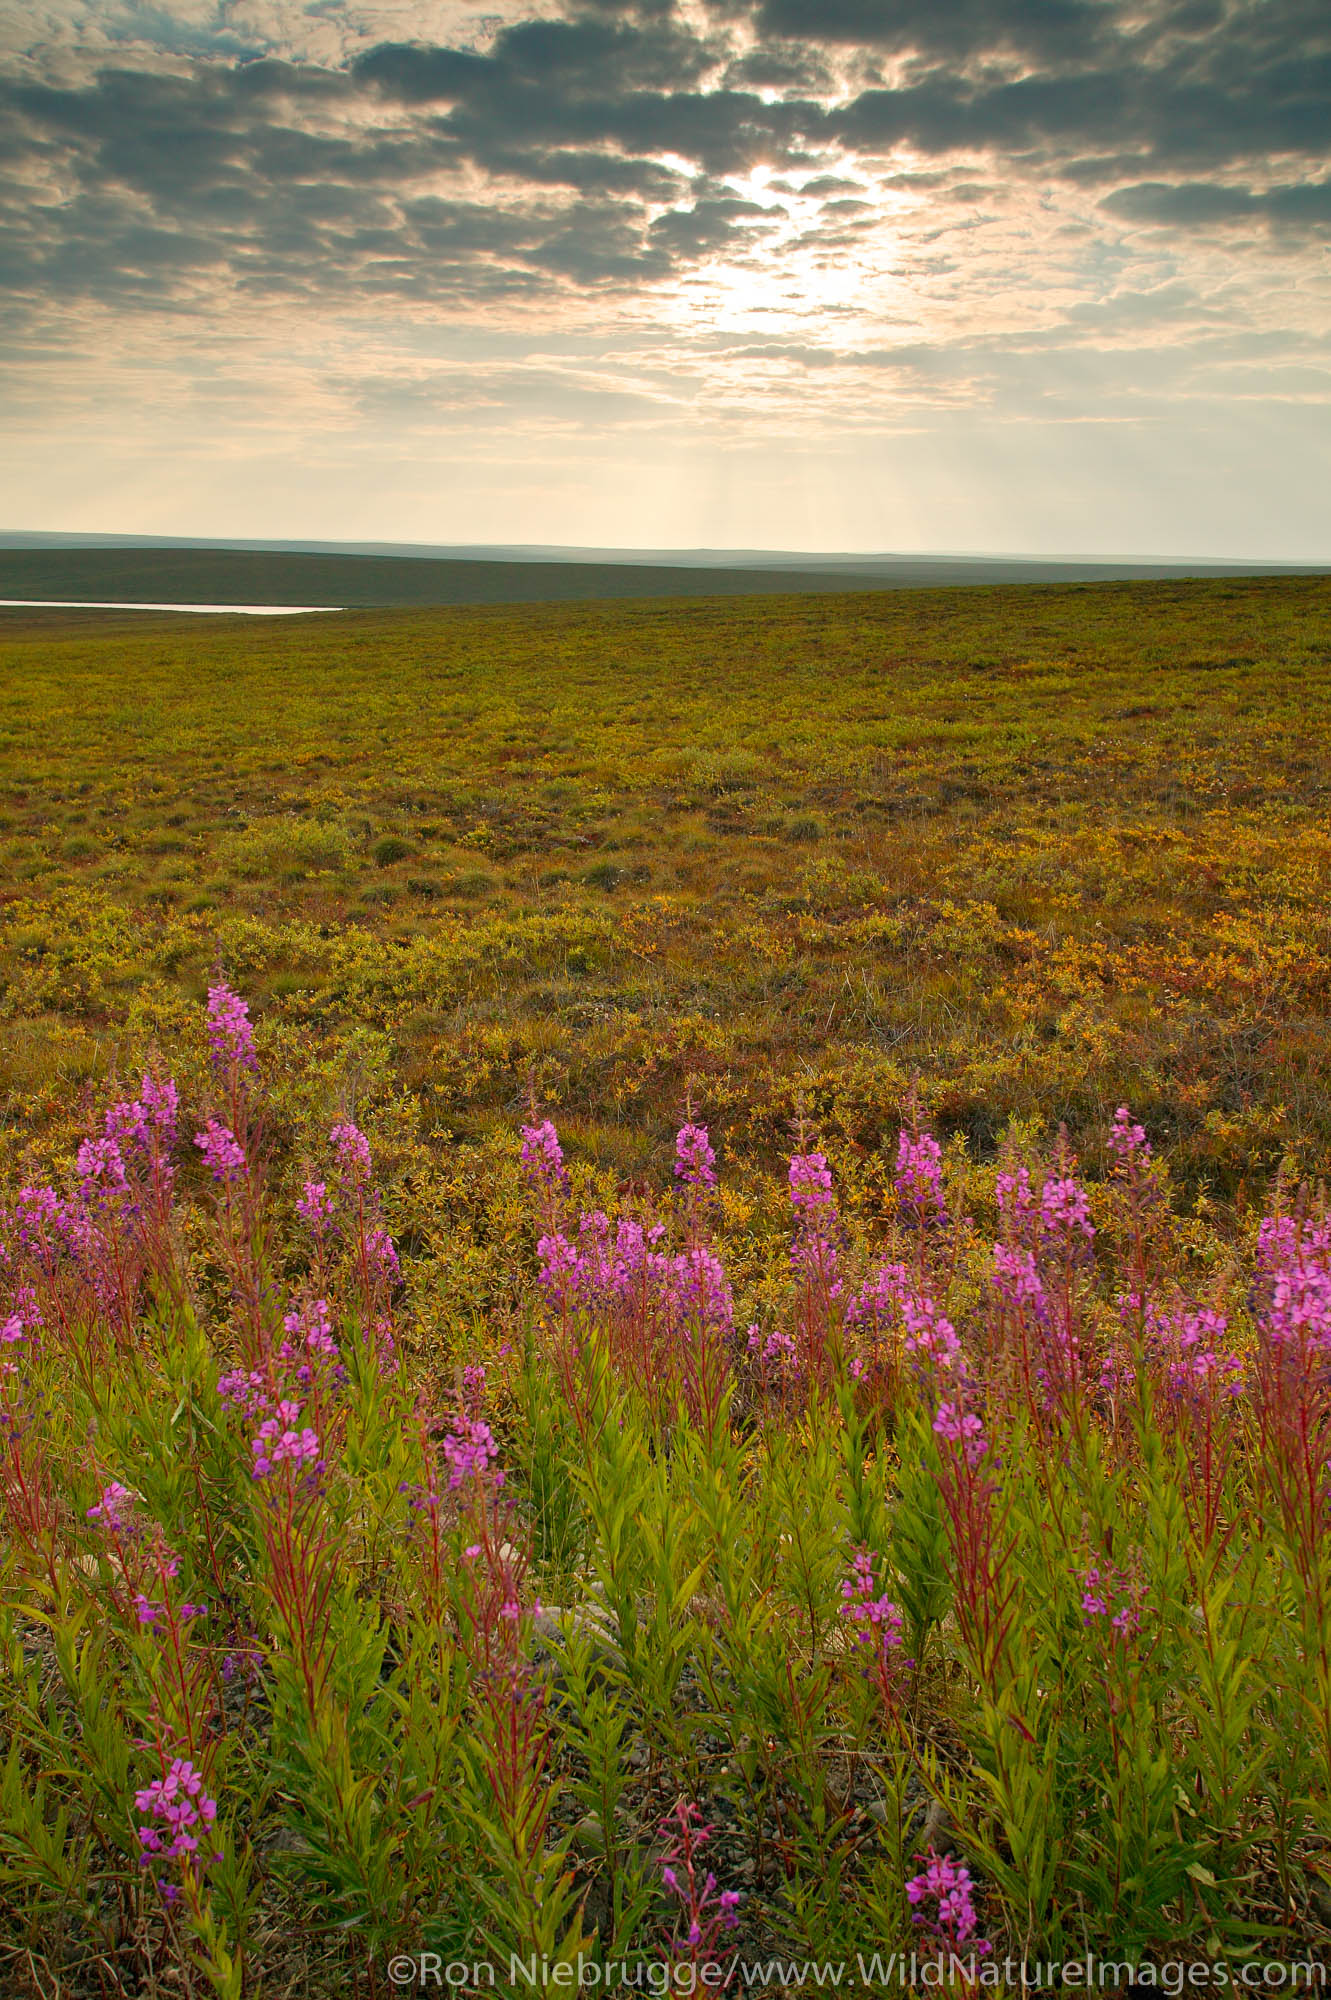 Fireweed and arctic tundra on the costal plain from the Dalton Highway, Alaska.